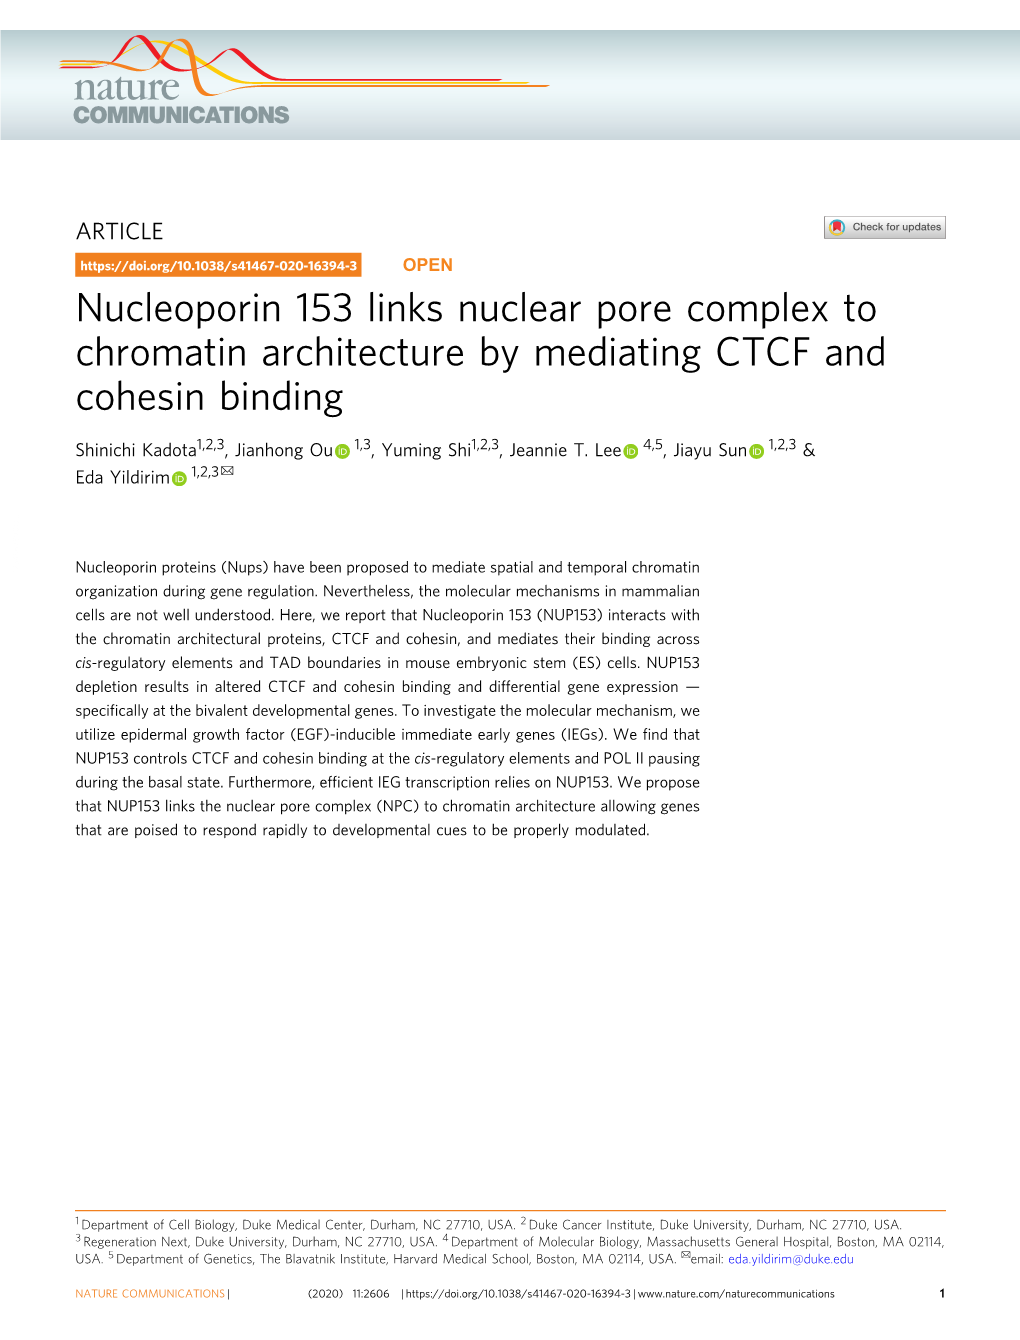 Nucleoporin 153 Links Nuclear Pore Complex to Chromatin Architecture by Mediating CTCF and Cohesin Binding